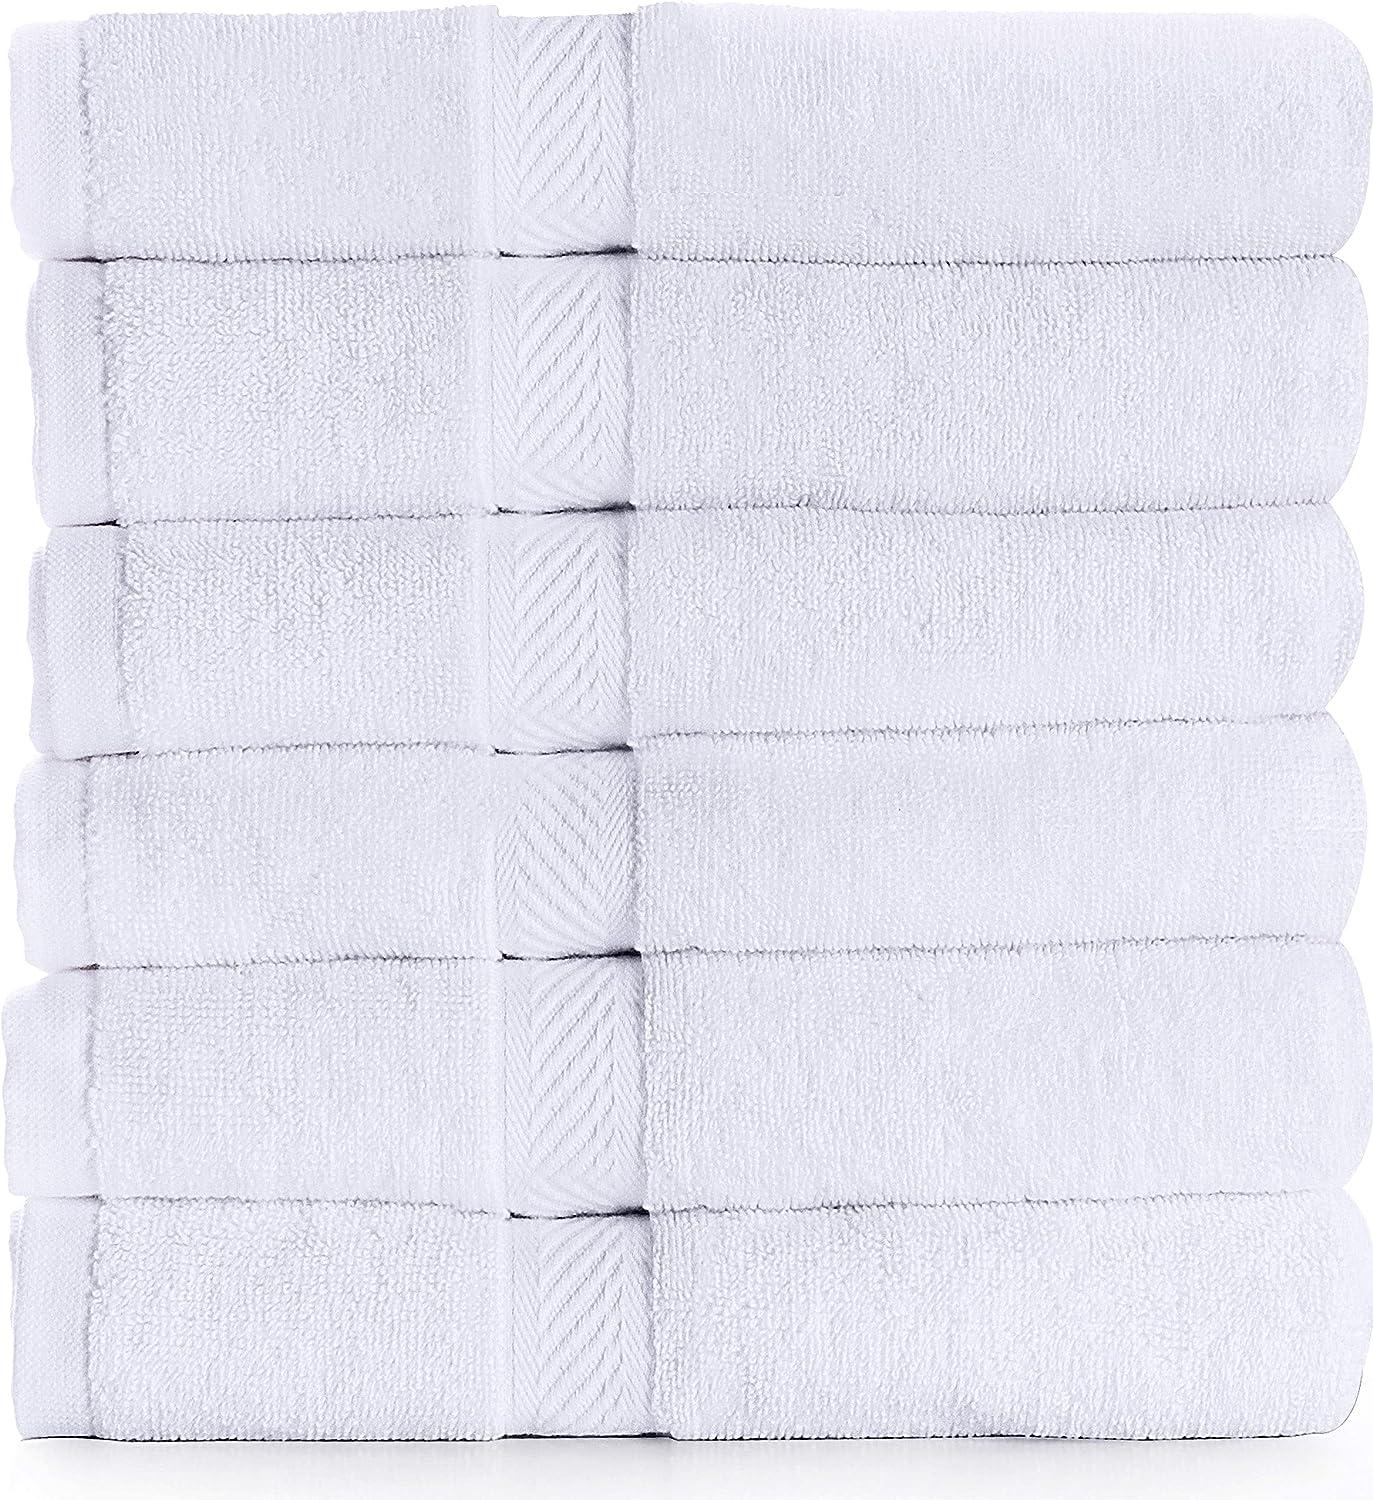  Utopia Towels Cotton Banded Bath Mats, White, [Not a Bathroom  Rug], 100% Ring-Spun Cotton - Highly Absorbent Shower Bathroom Floor Mat  (Pack of 2) : Home & Kitchen